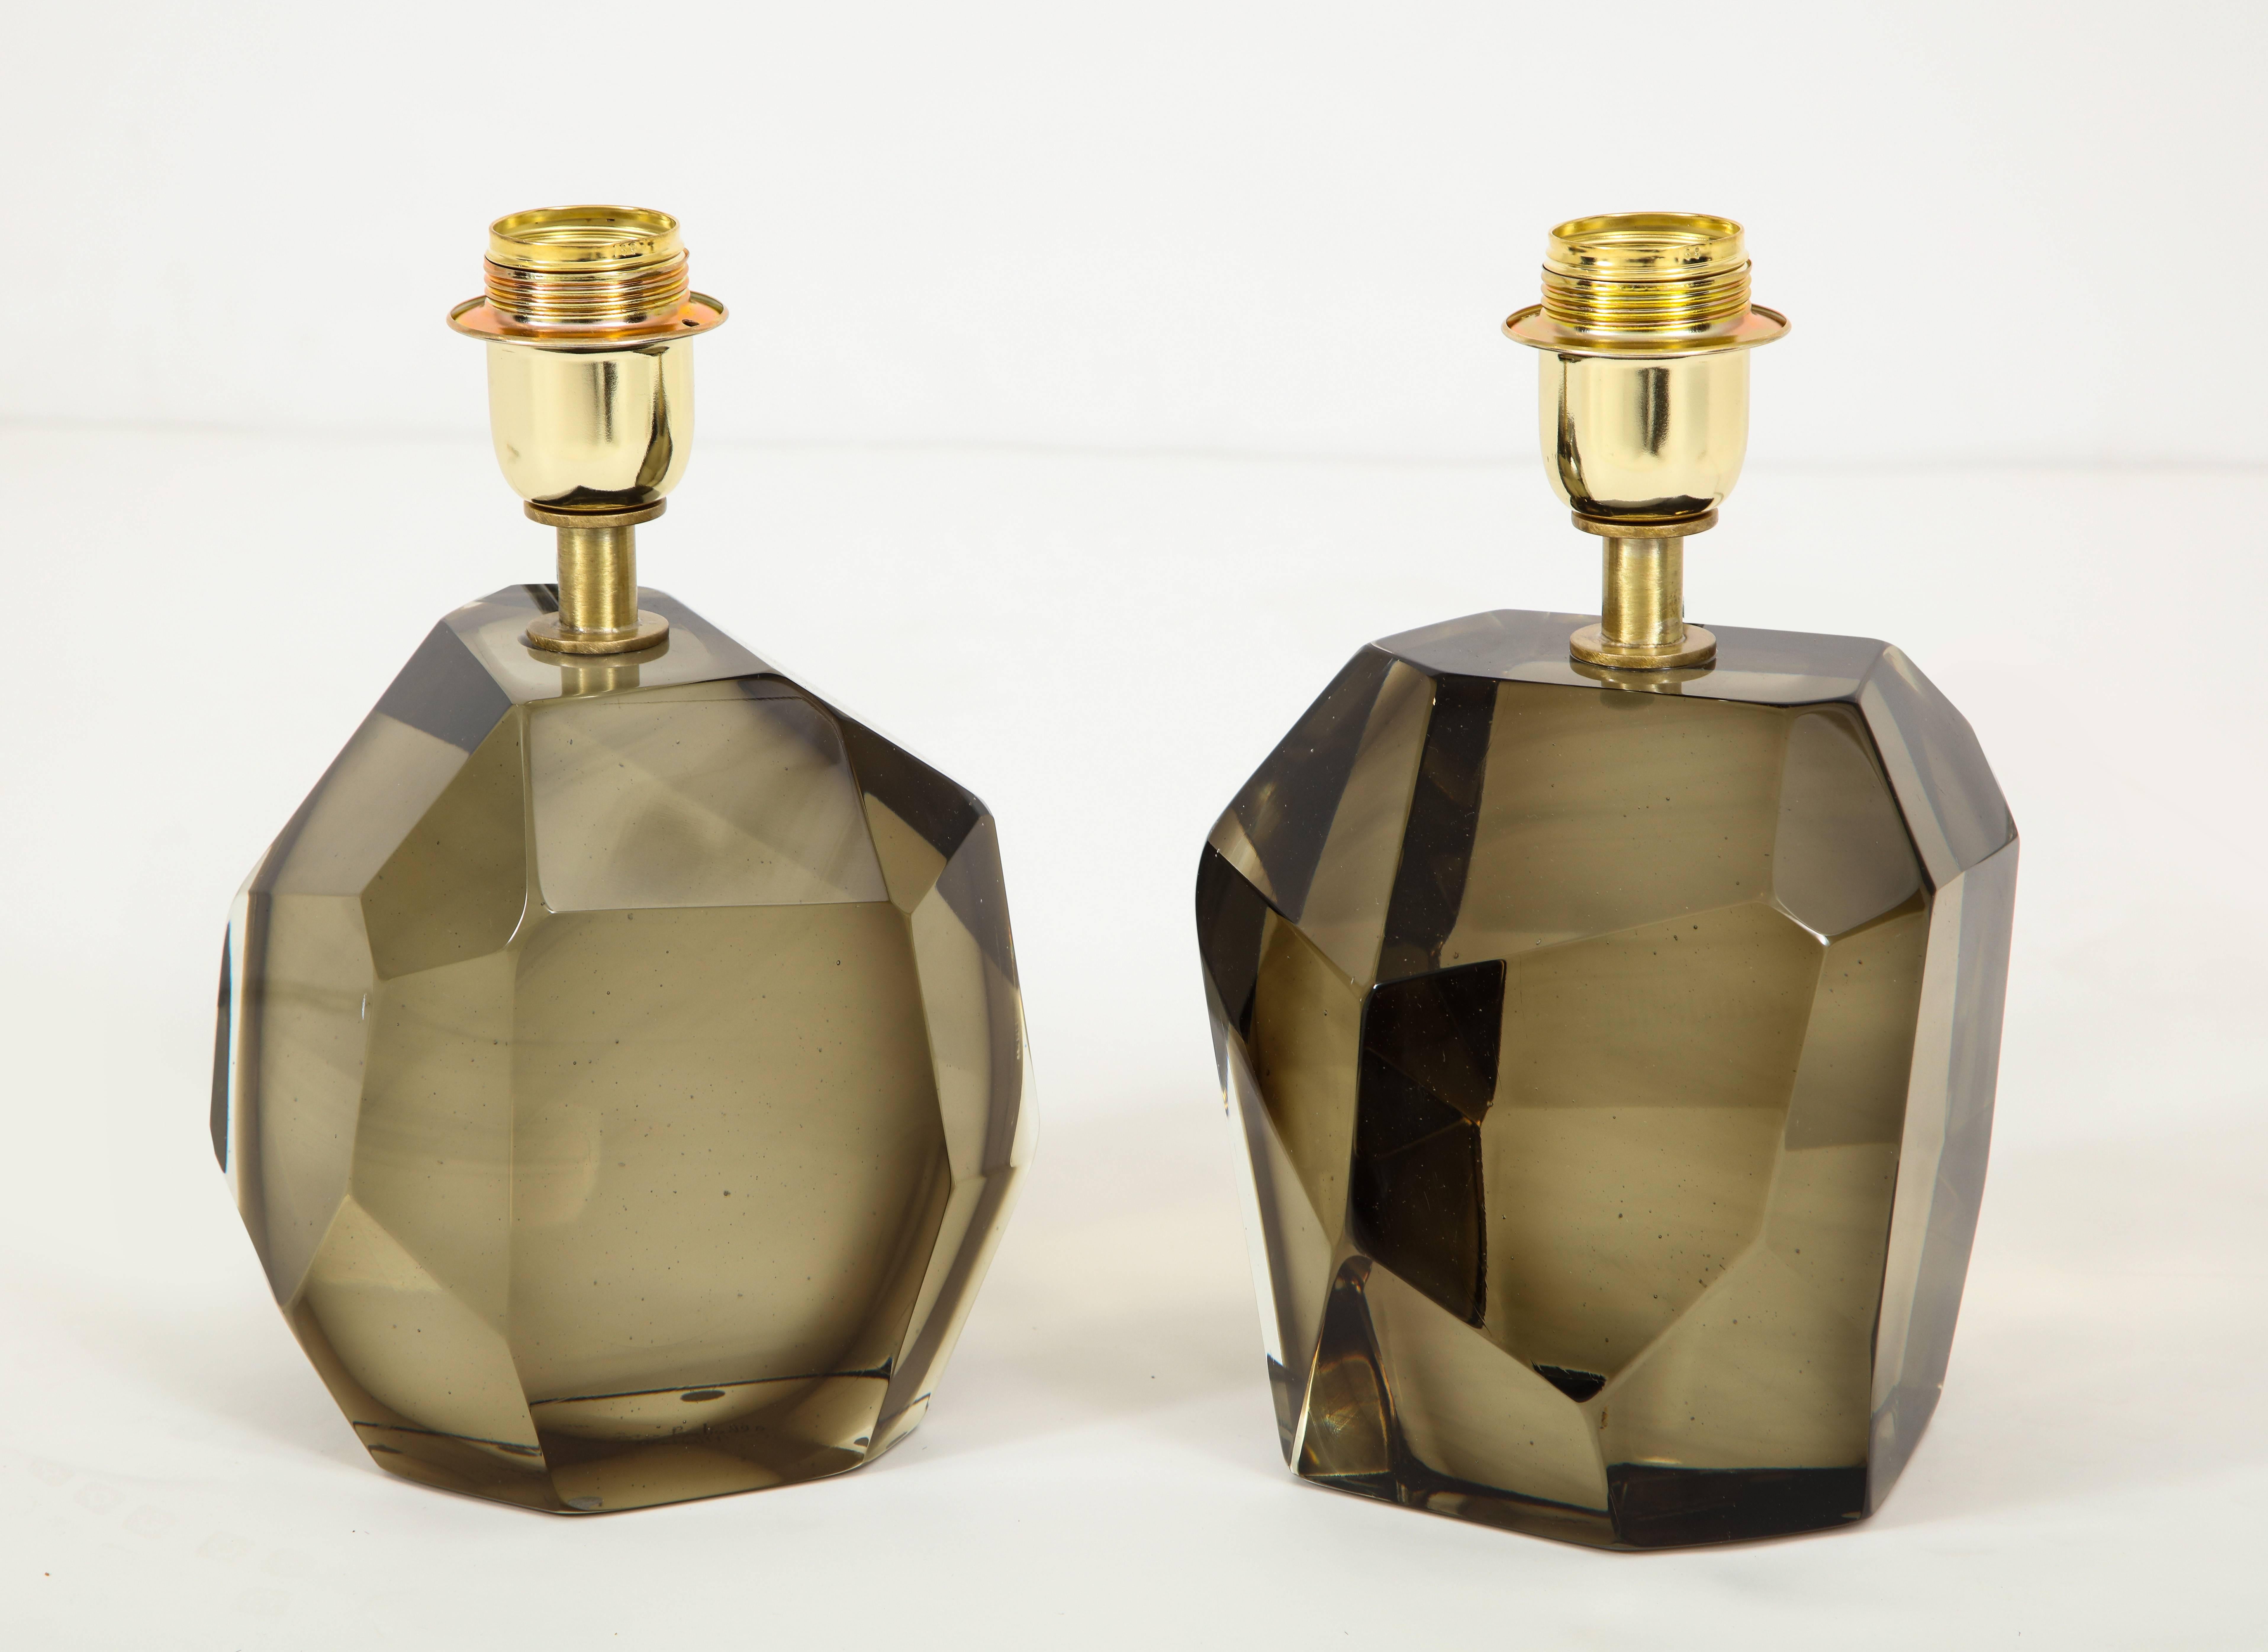 Unique pair of solid faceted Murano glass table lamps in an elegant Smokey taupe or bronze color with a gold tone/brass armature heavy and solid. Made by hand in Murano, Italy. Wired for U.S. use. Height of 10